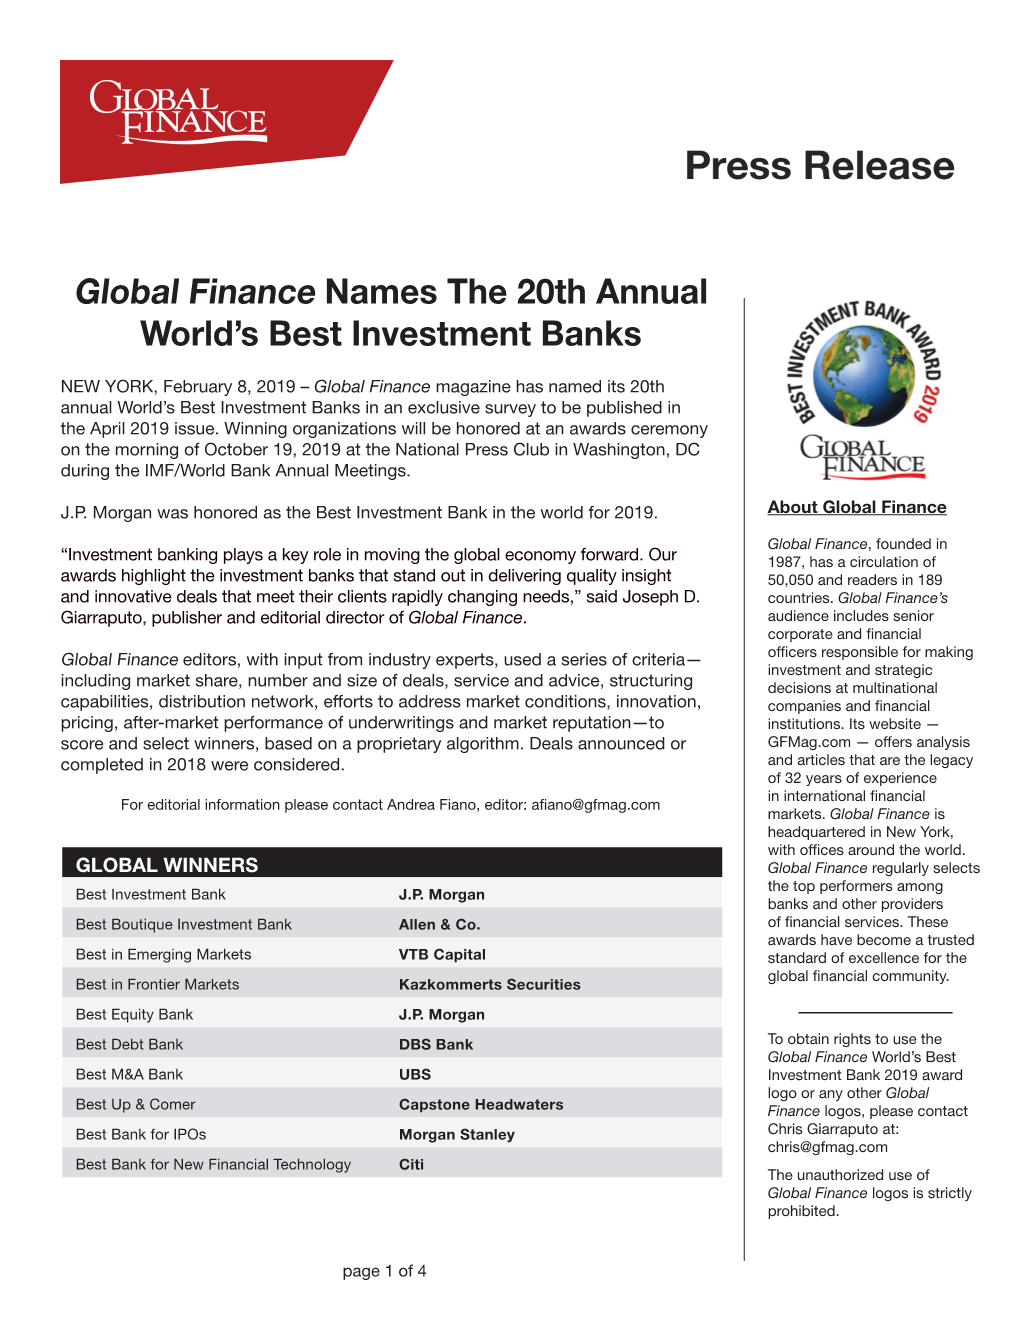 Global Finance Names the 20Th Annual World's Best Investment